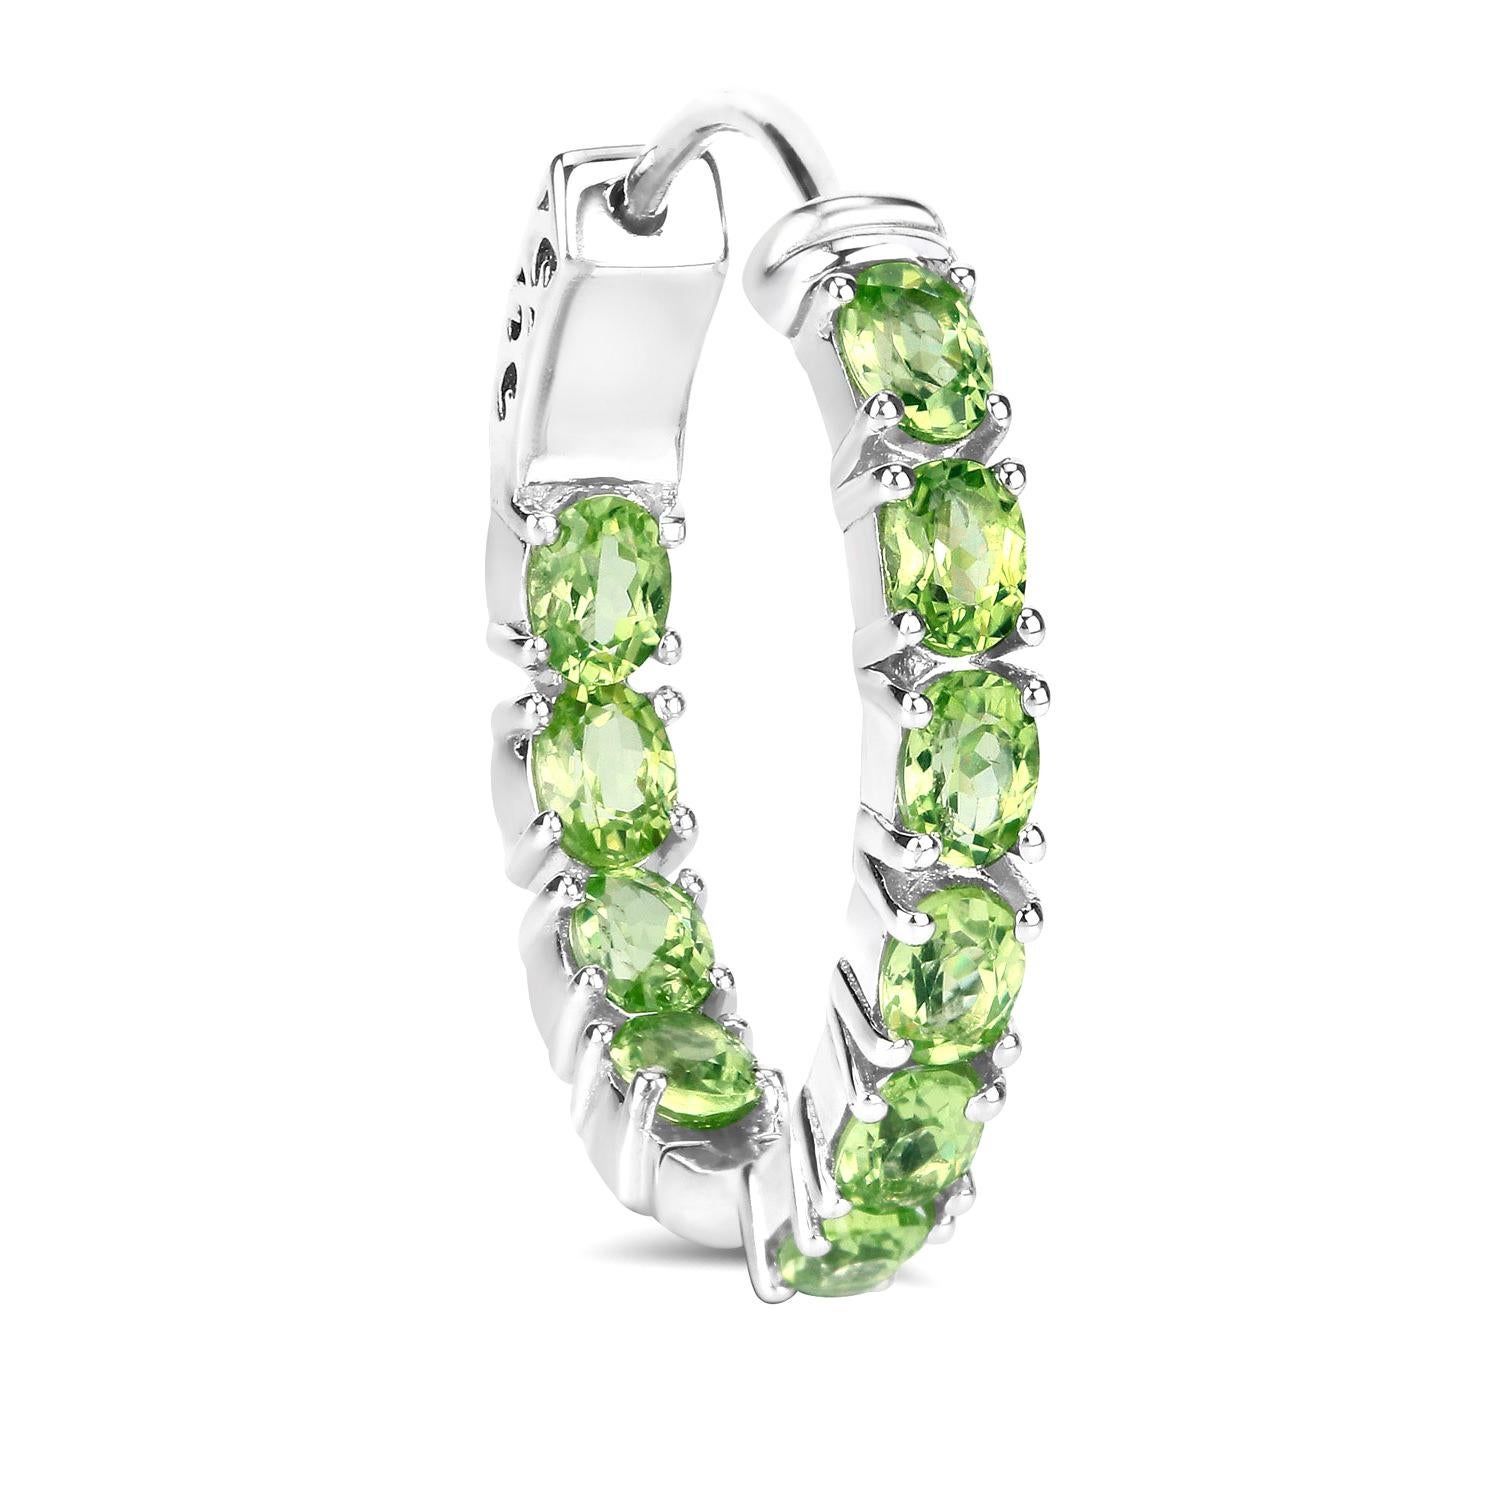 Oval Cut Natural Peridot Hoop Earrings 3.4 Carats Rhodium Plated Silver For Sale